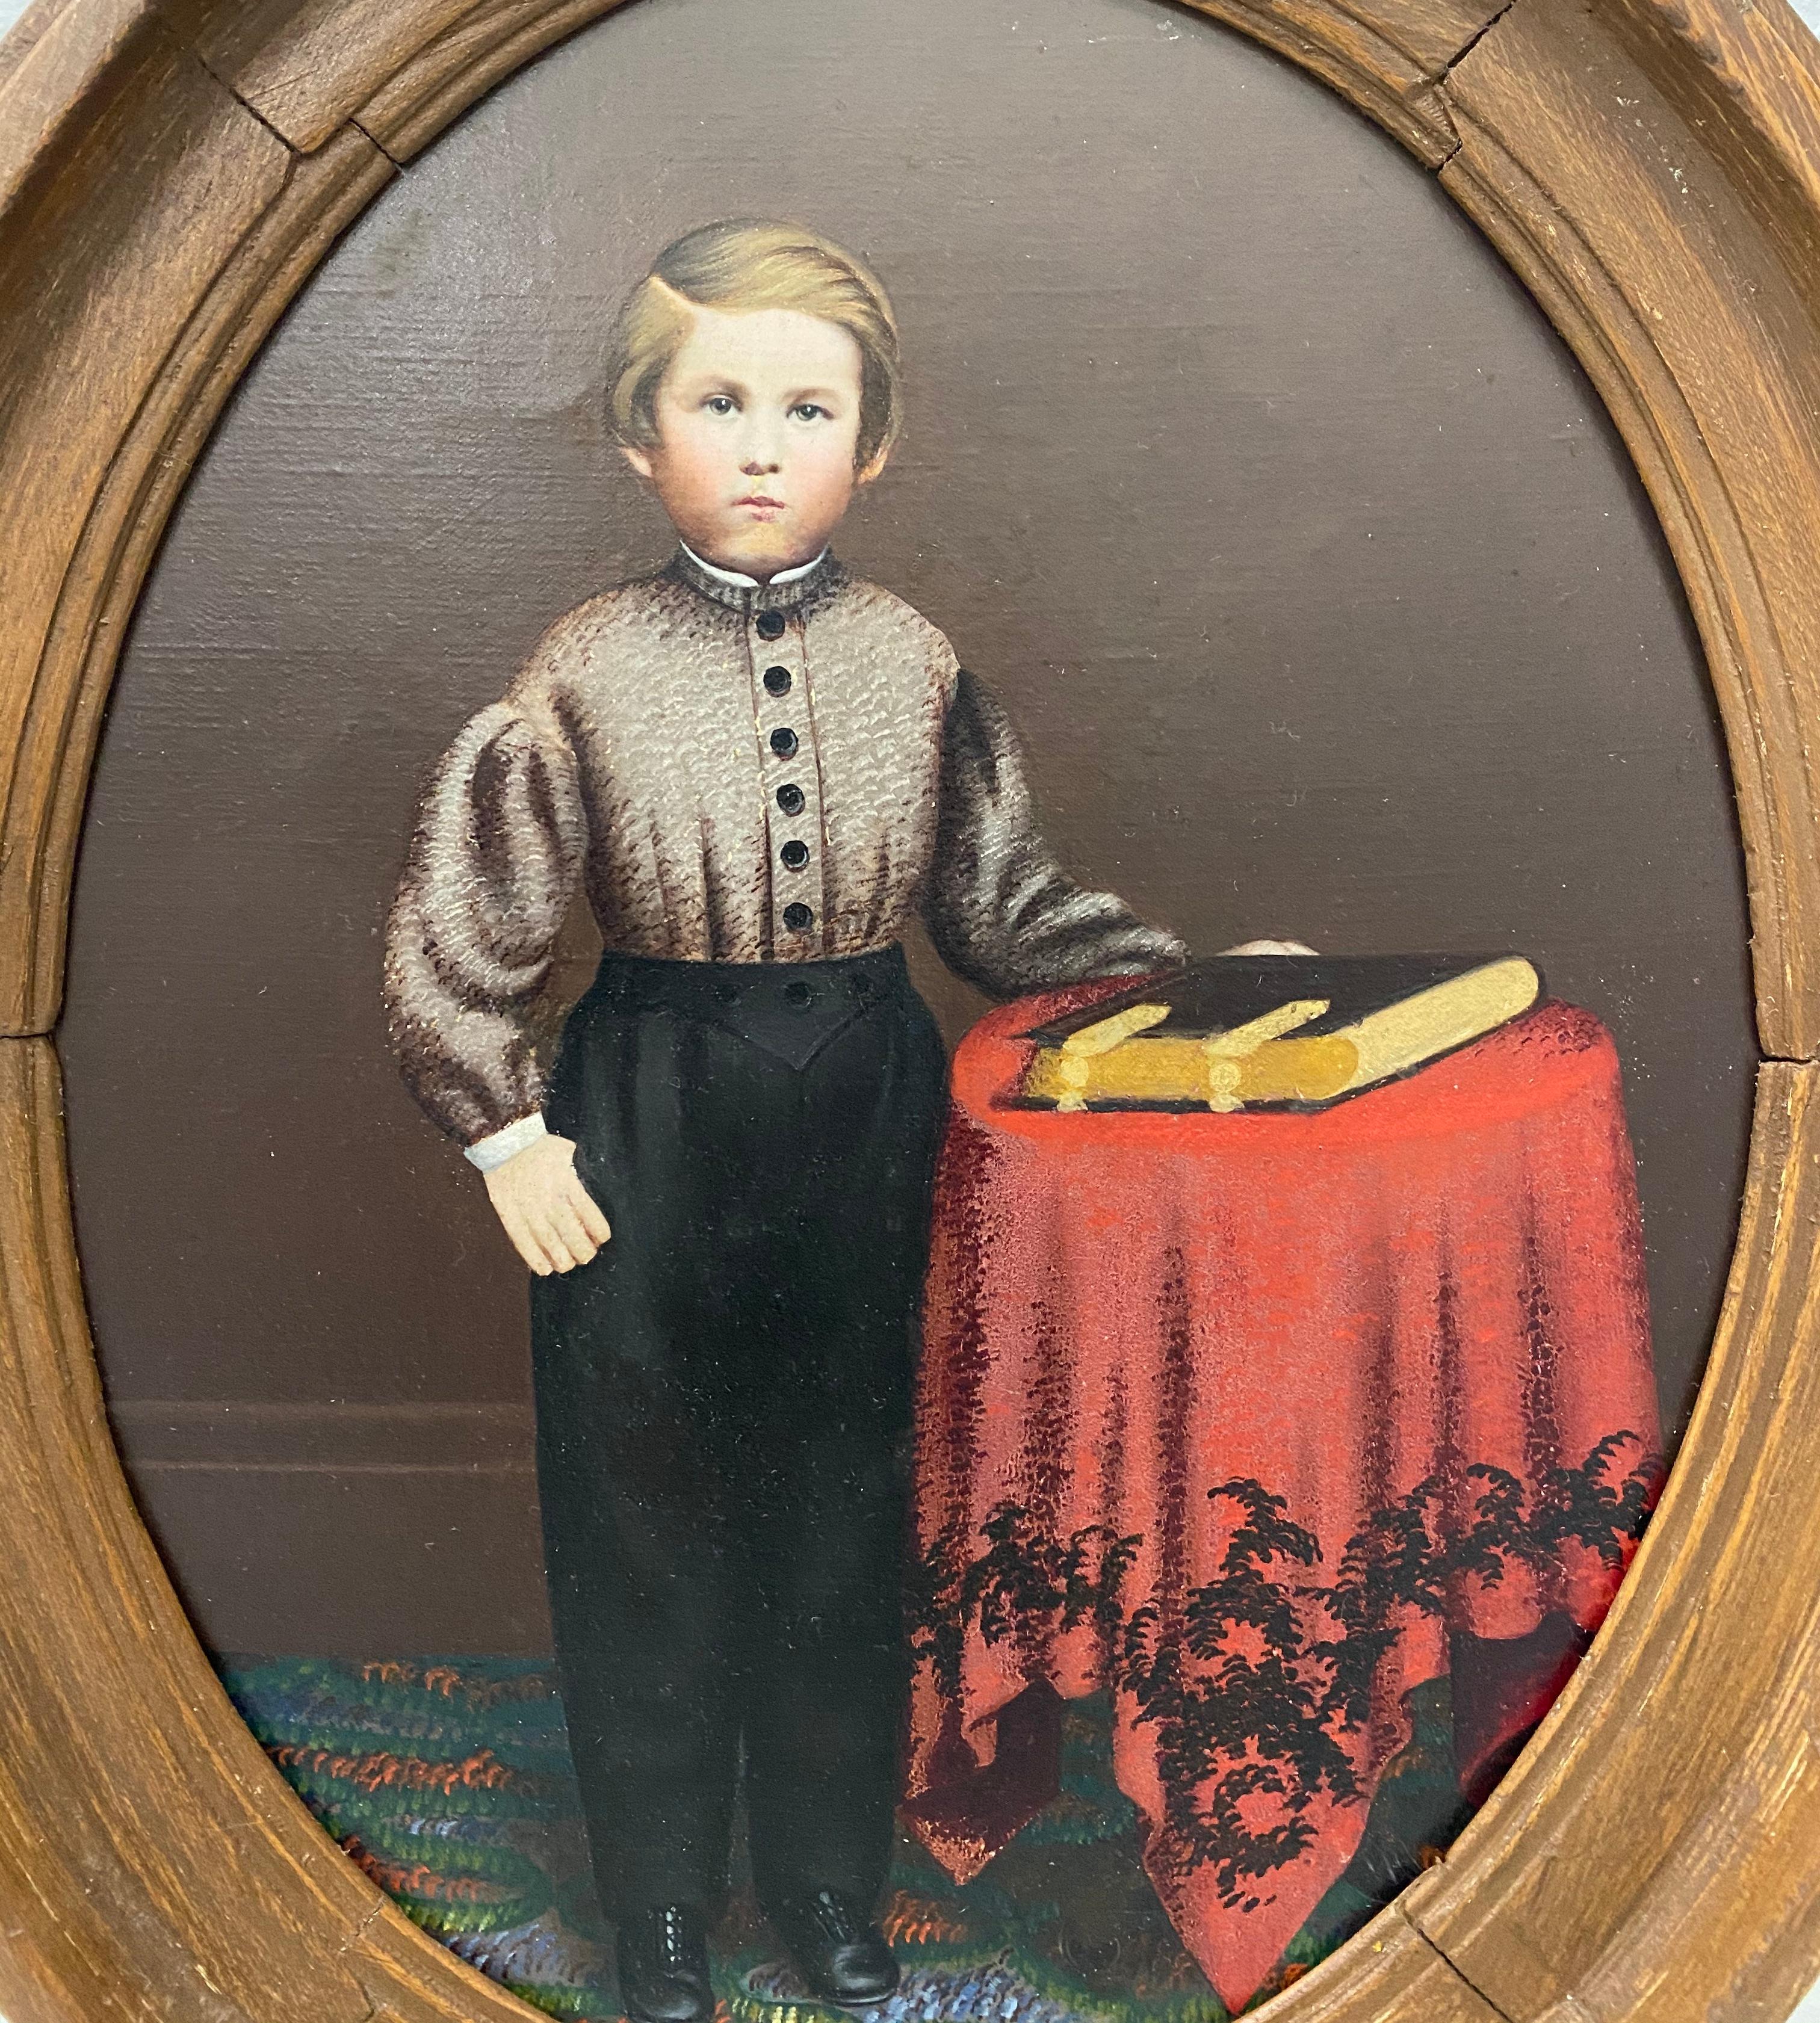 19th c. American Oil Portrait of a Young Man with his Bible - Painting by Unknown